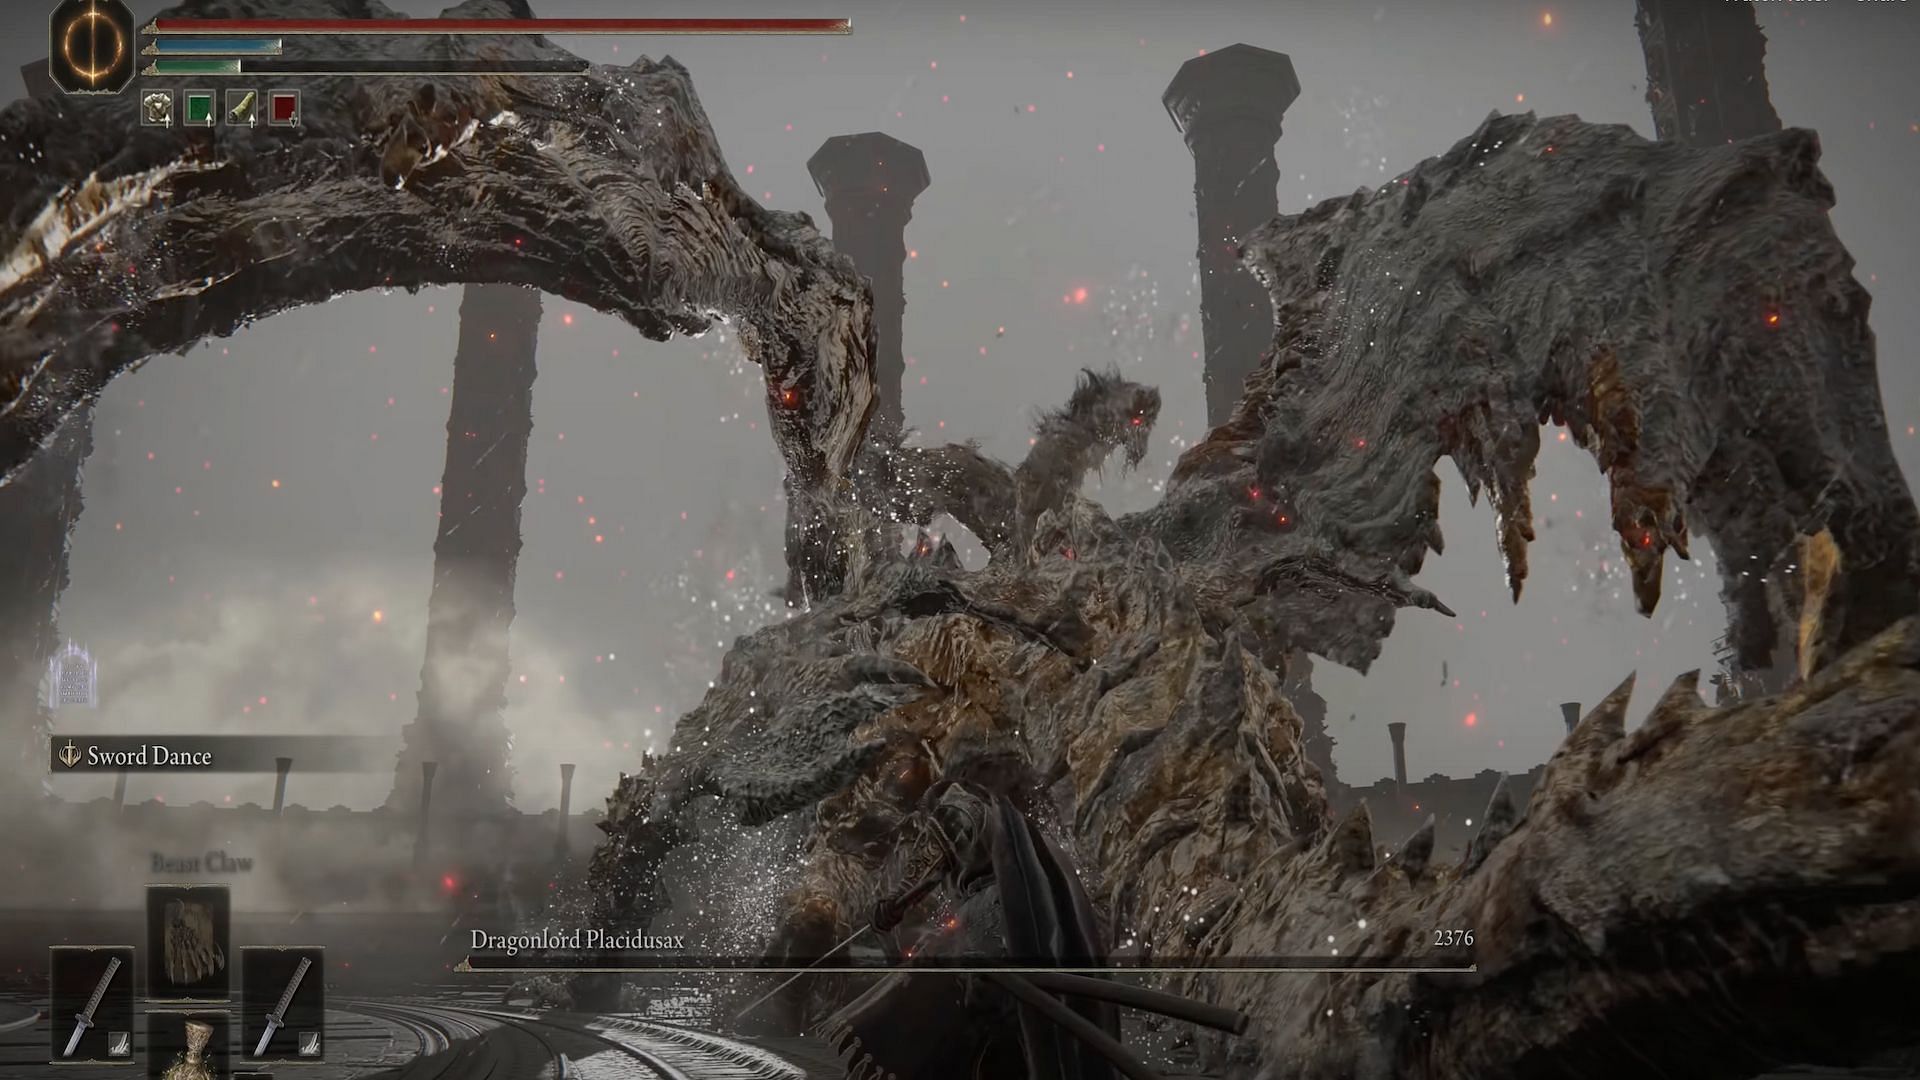 Elden Ring players will be able to slay this dragon with careful dodges and claim their runes (Image via Shirrako/YouTube)